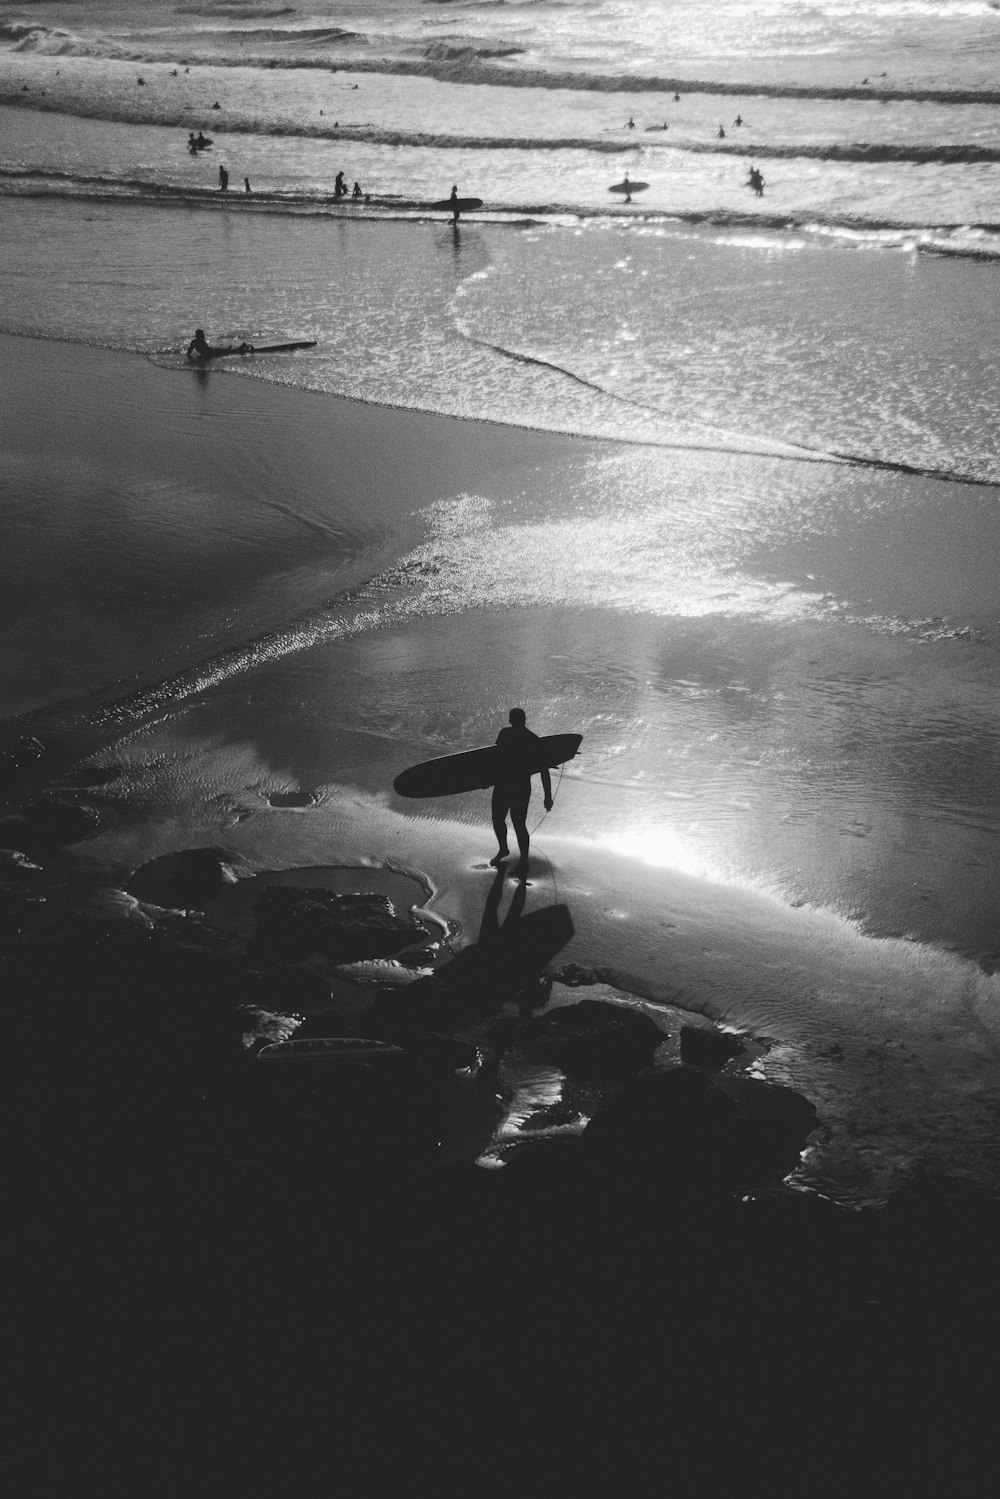 greyscale photography of person carrying surfboard on seashore